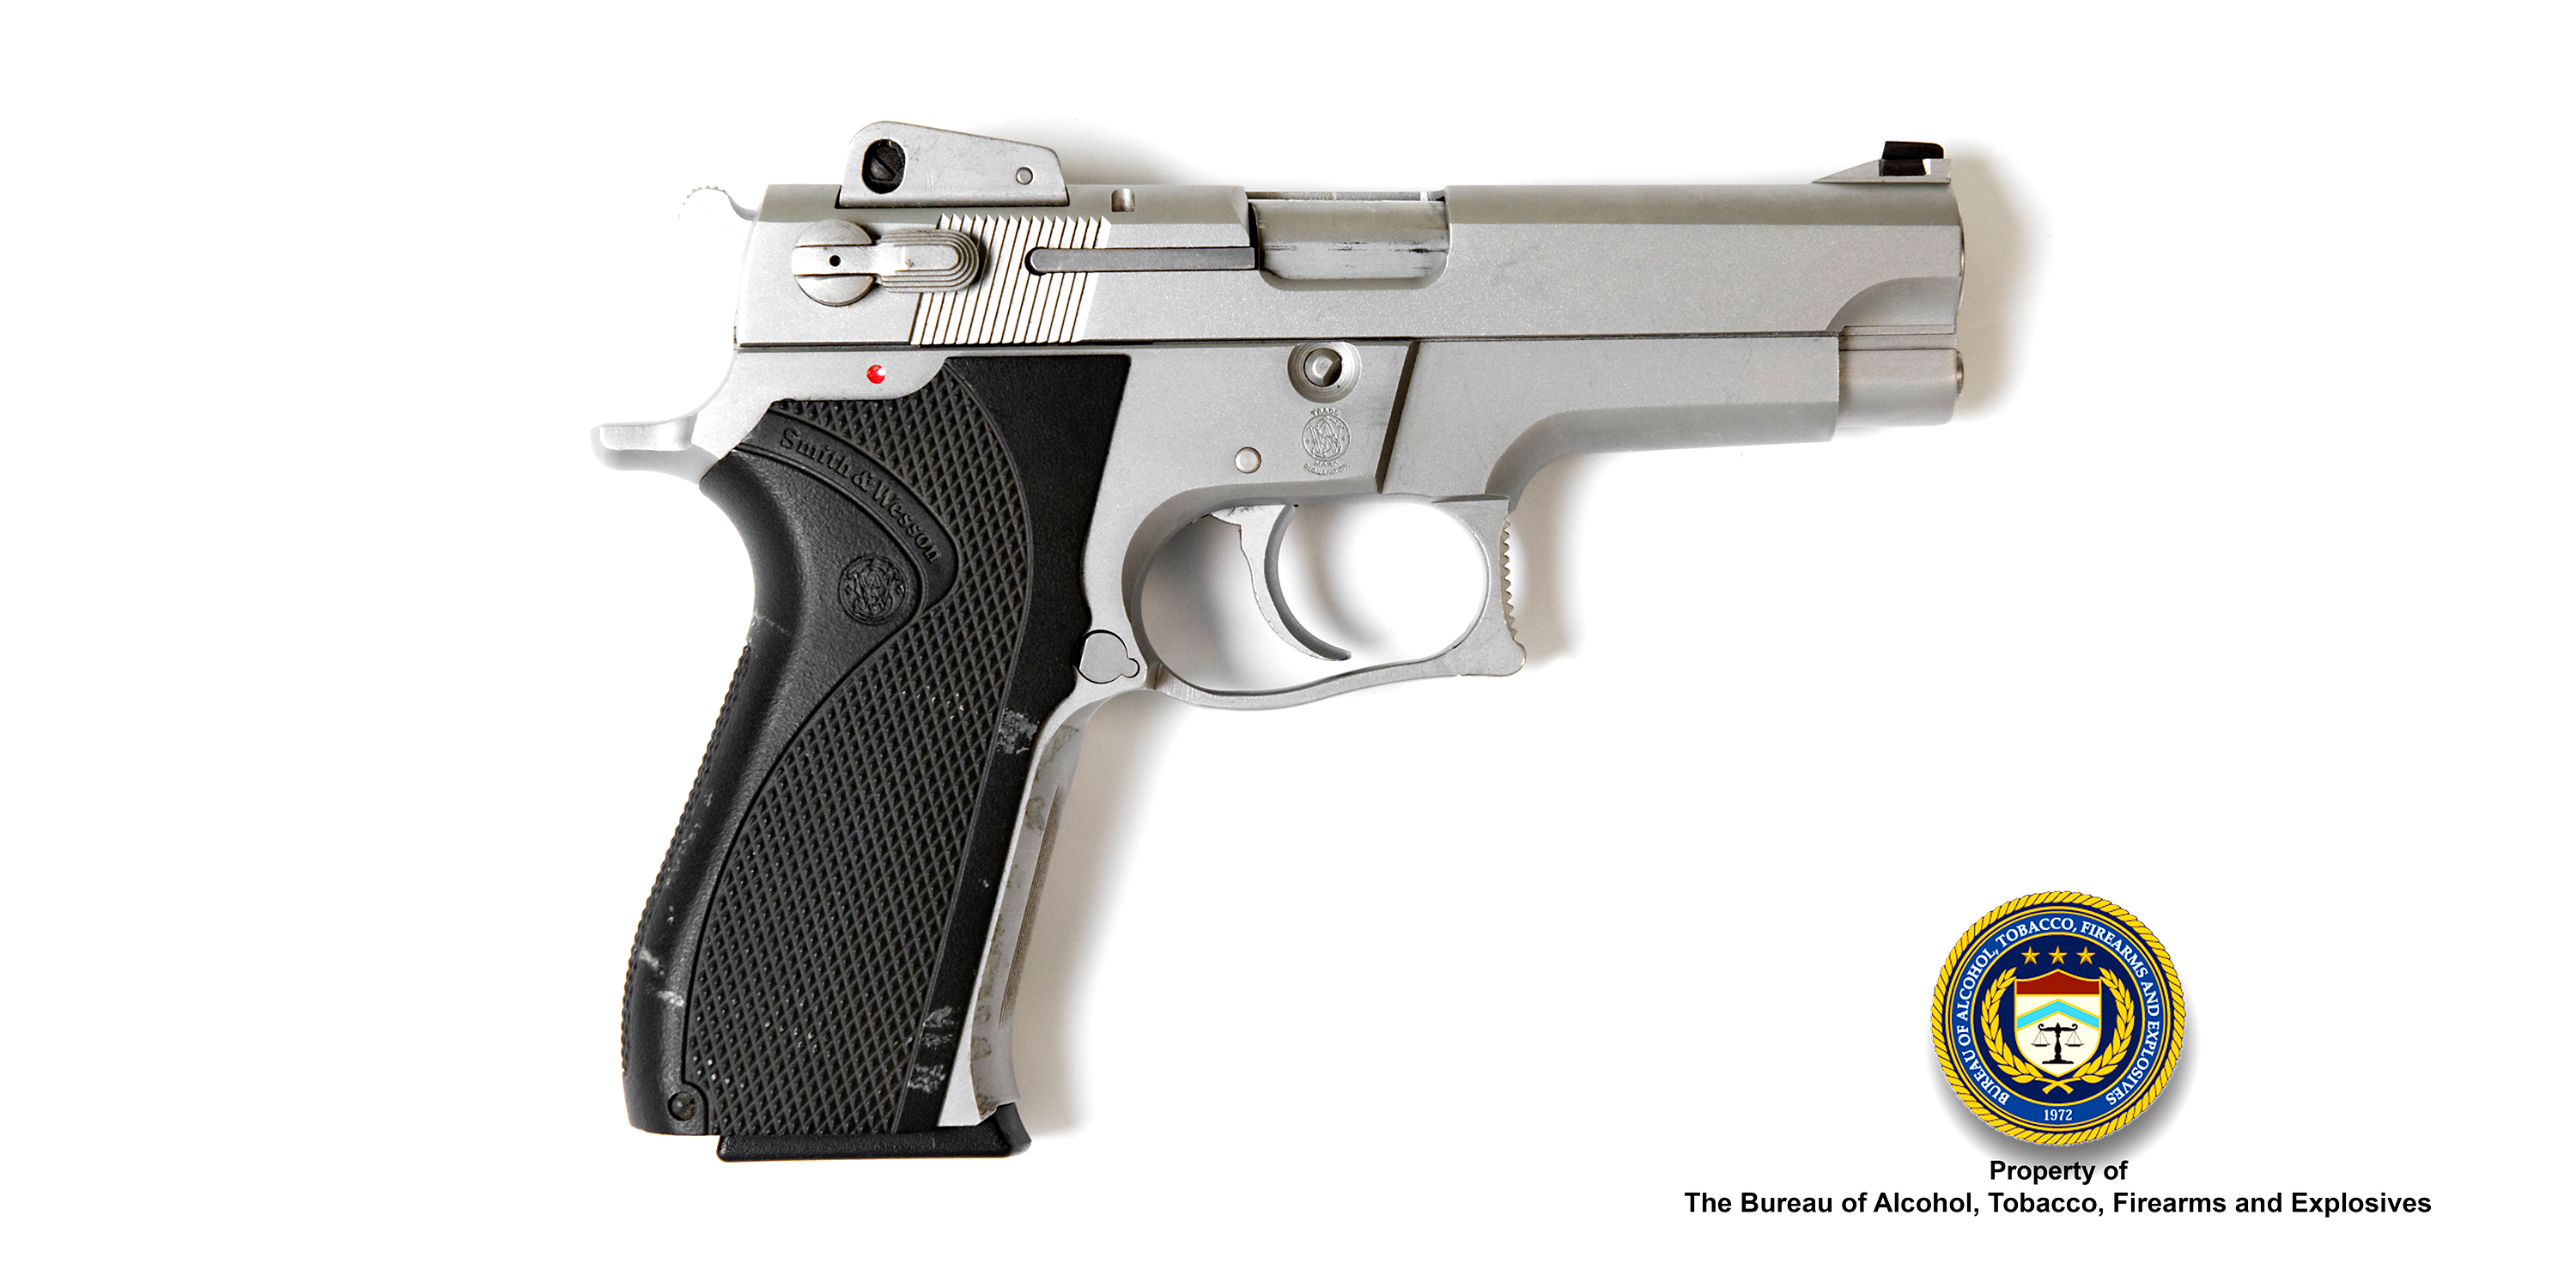 Smith & Wesson Pistol #28